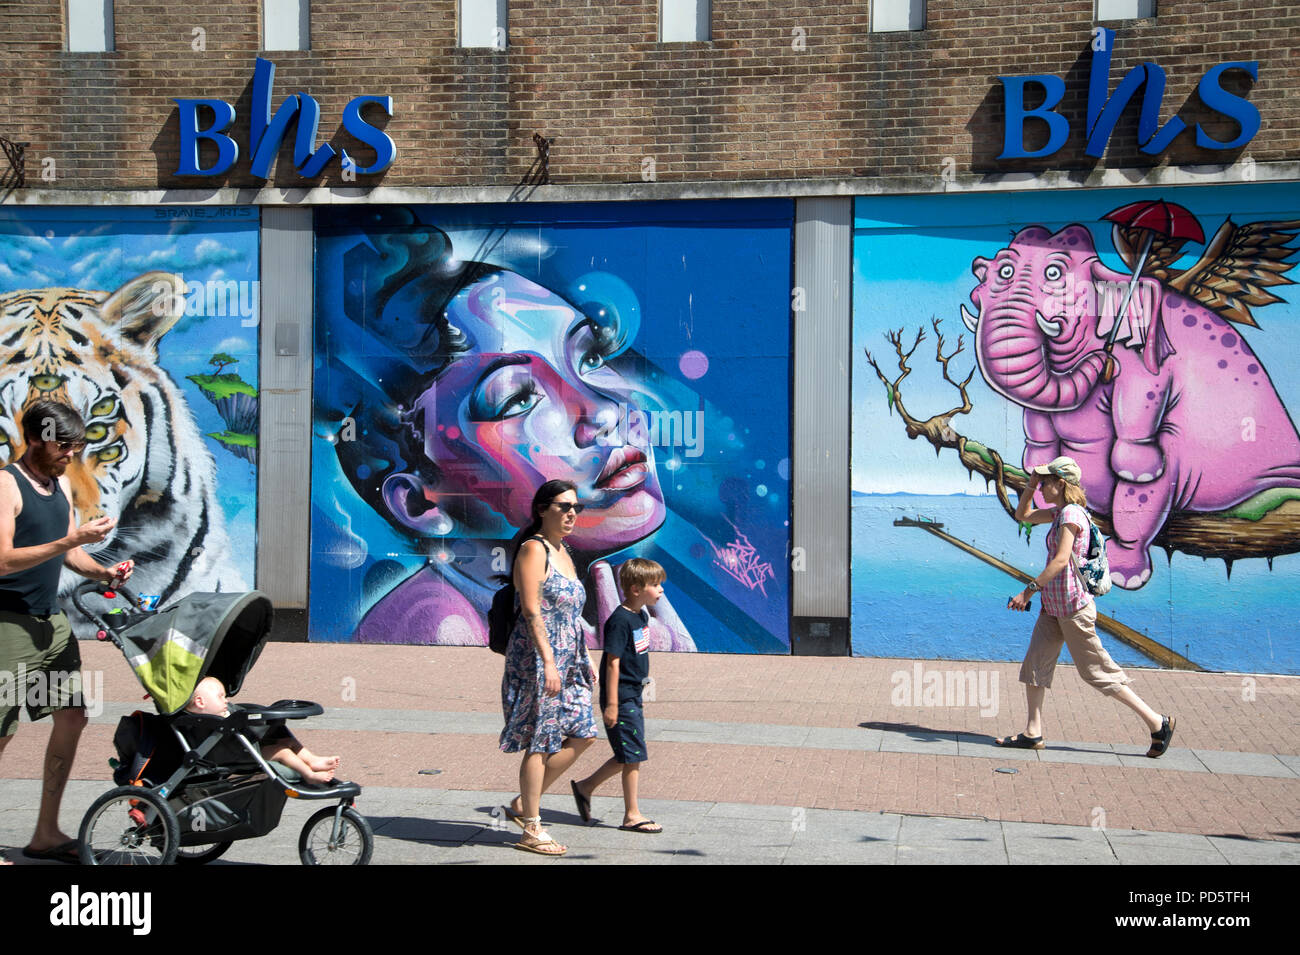 Southend on Sea, Essex. People walk past a closed down BHS (British Home Stores) shop now decorated with colorful street art Stock Photo